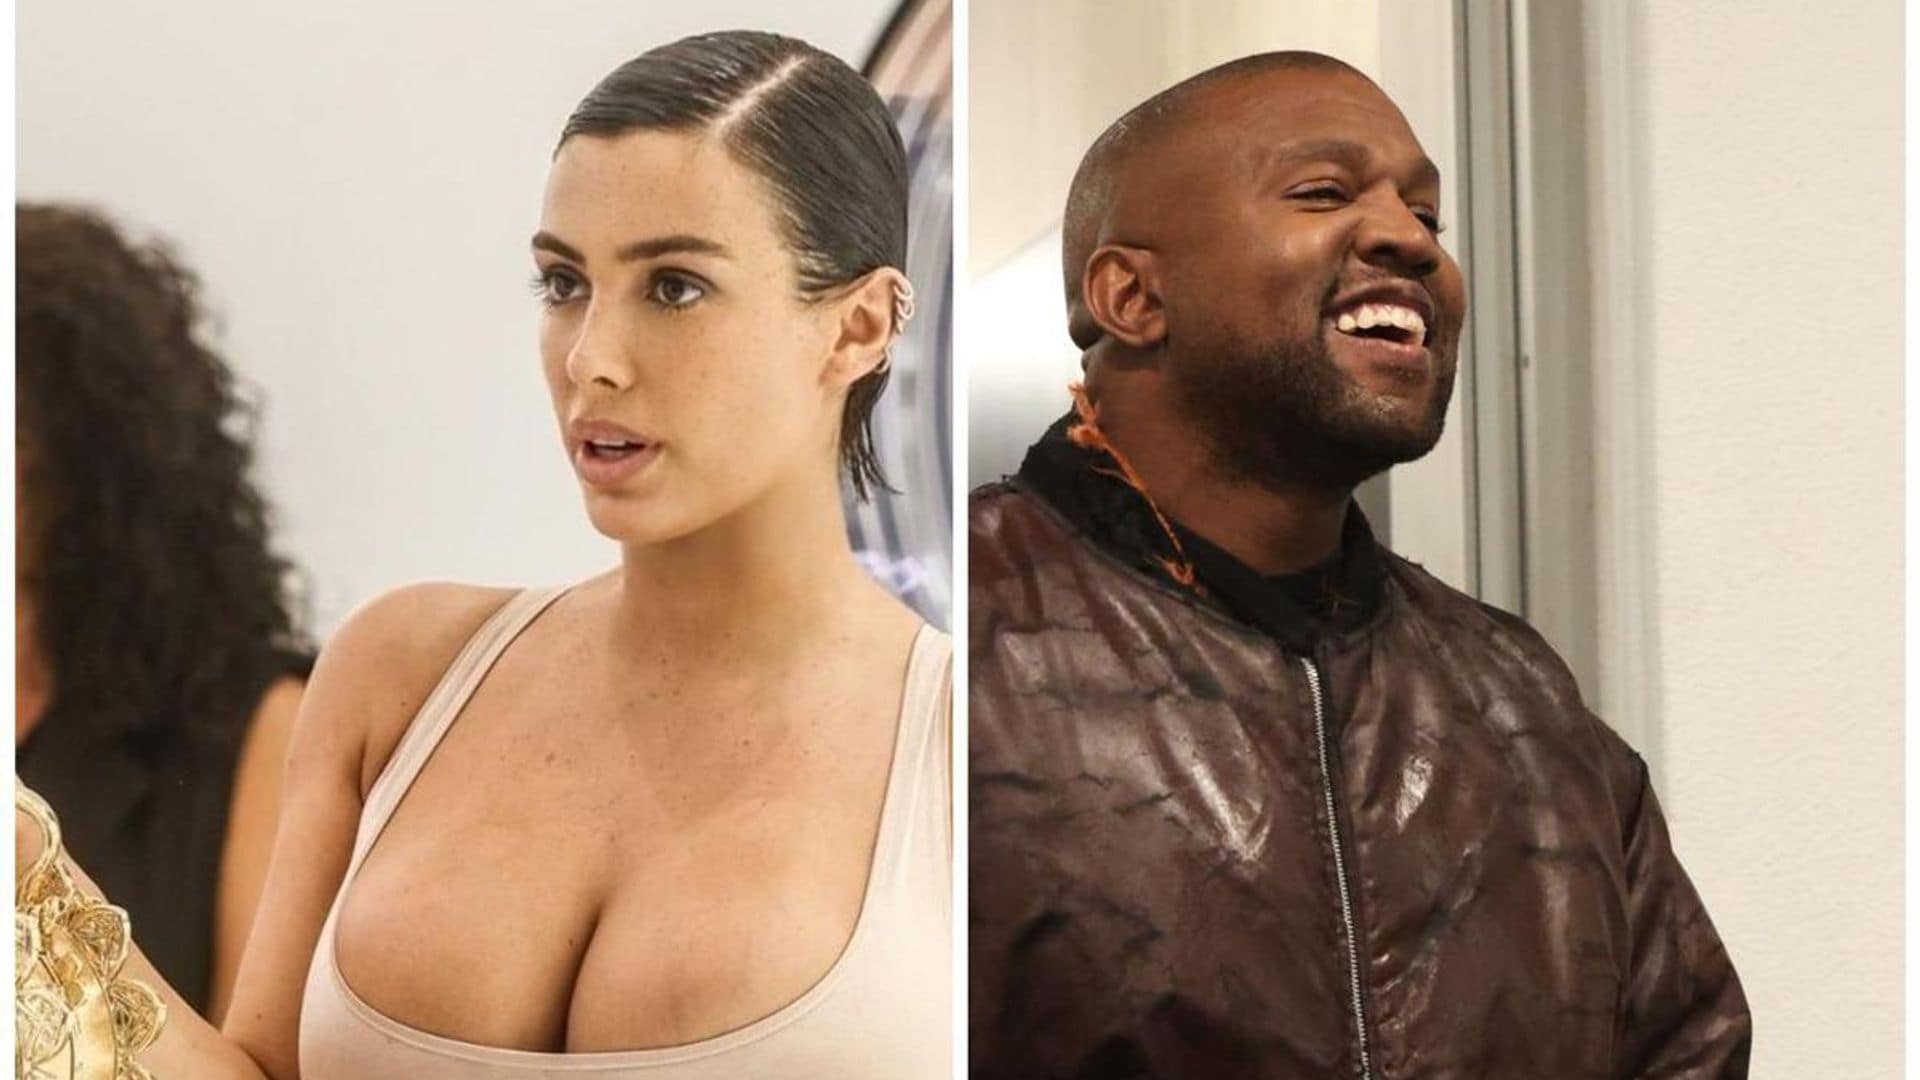 Kanye West and Bianca Censori back together after apparent ultimatum: ‘She had a change of heart’